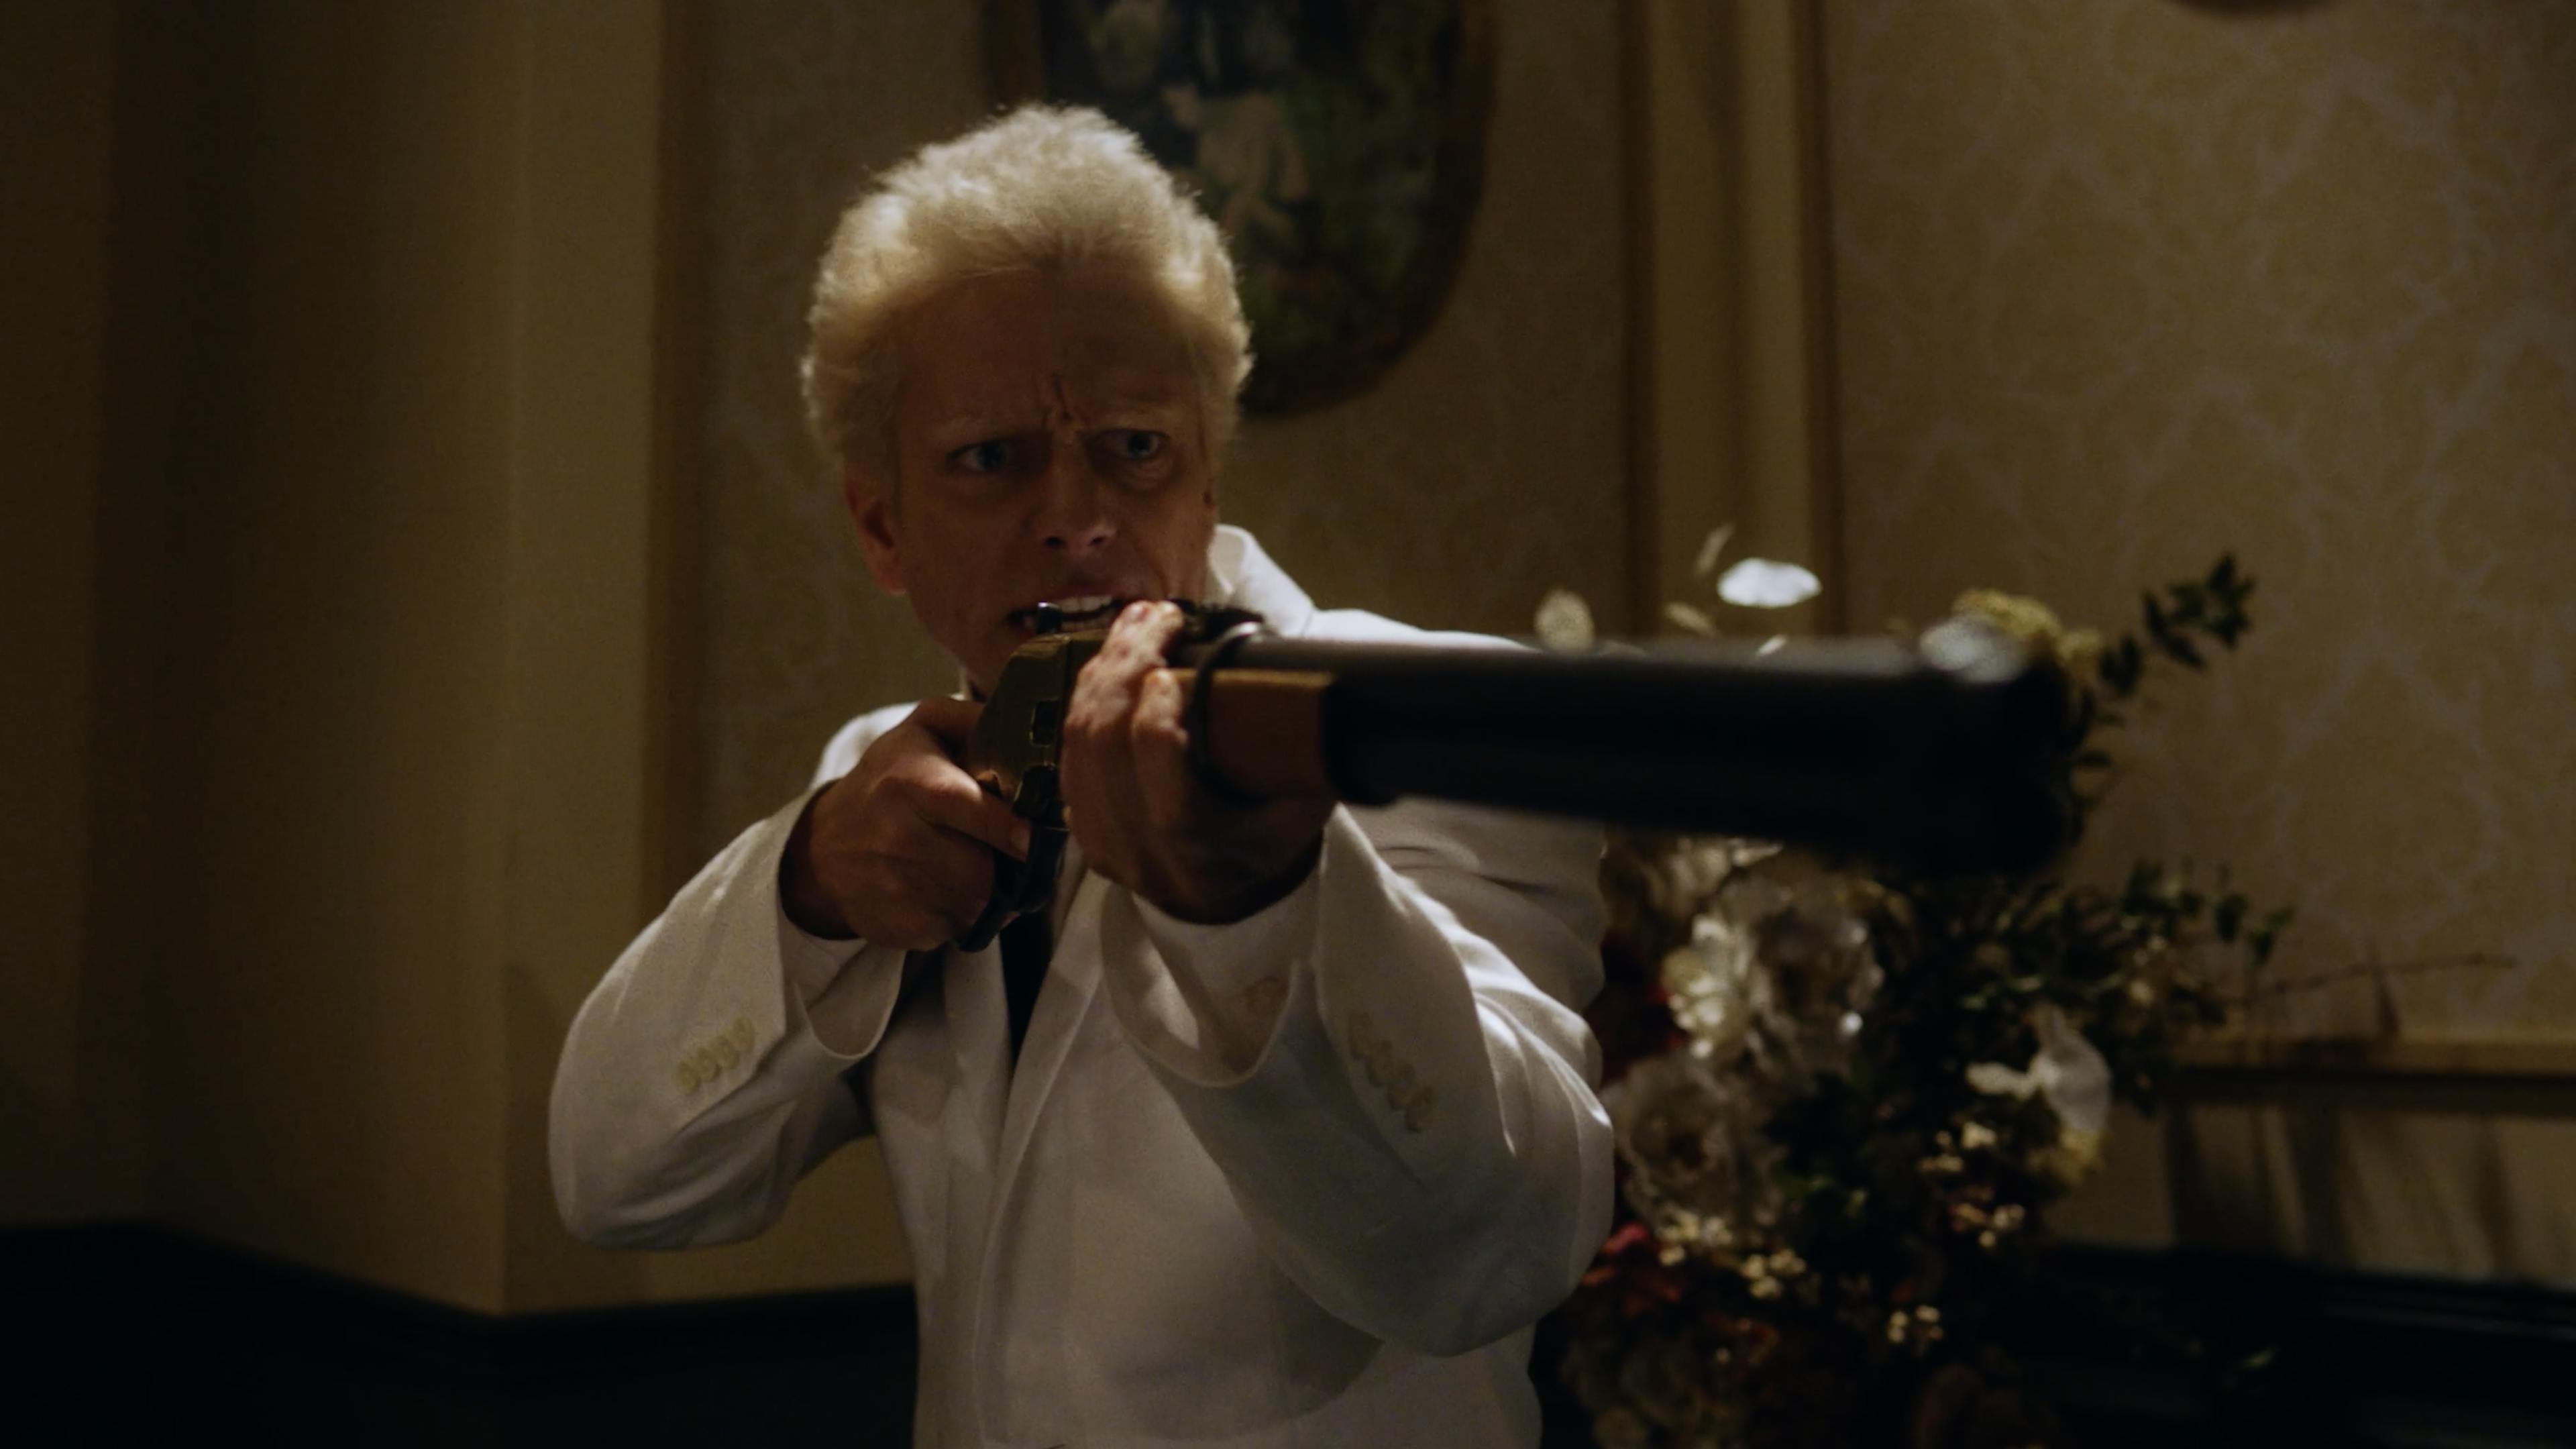 A man in a white suit holds a shotgun